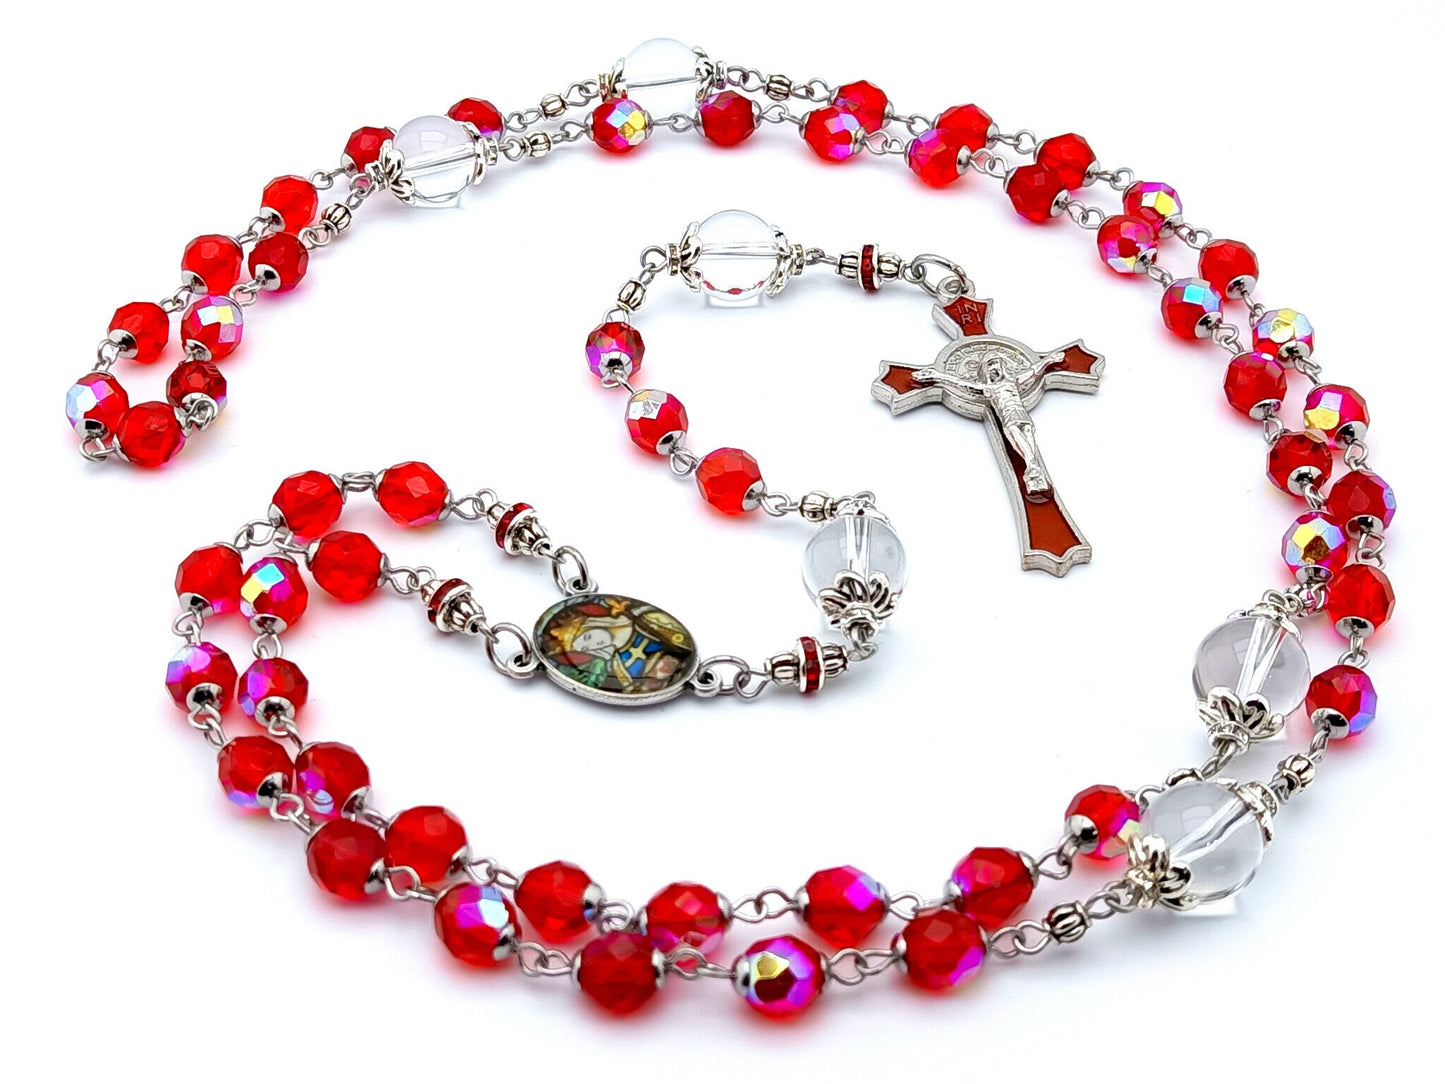 Saint Margaret of Scotland unique rosary beads with red and clear glass beads, red enamel Saint Benedict crucifix and silver picture centre medal.